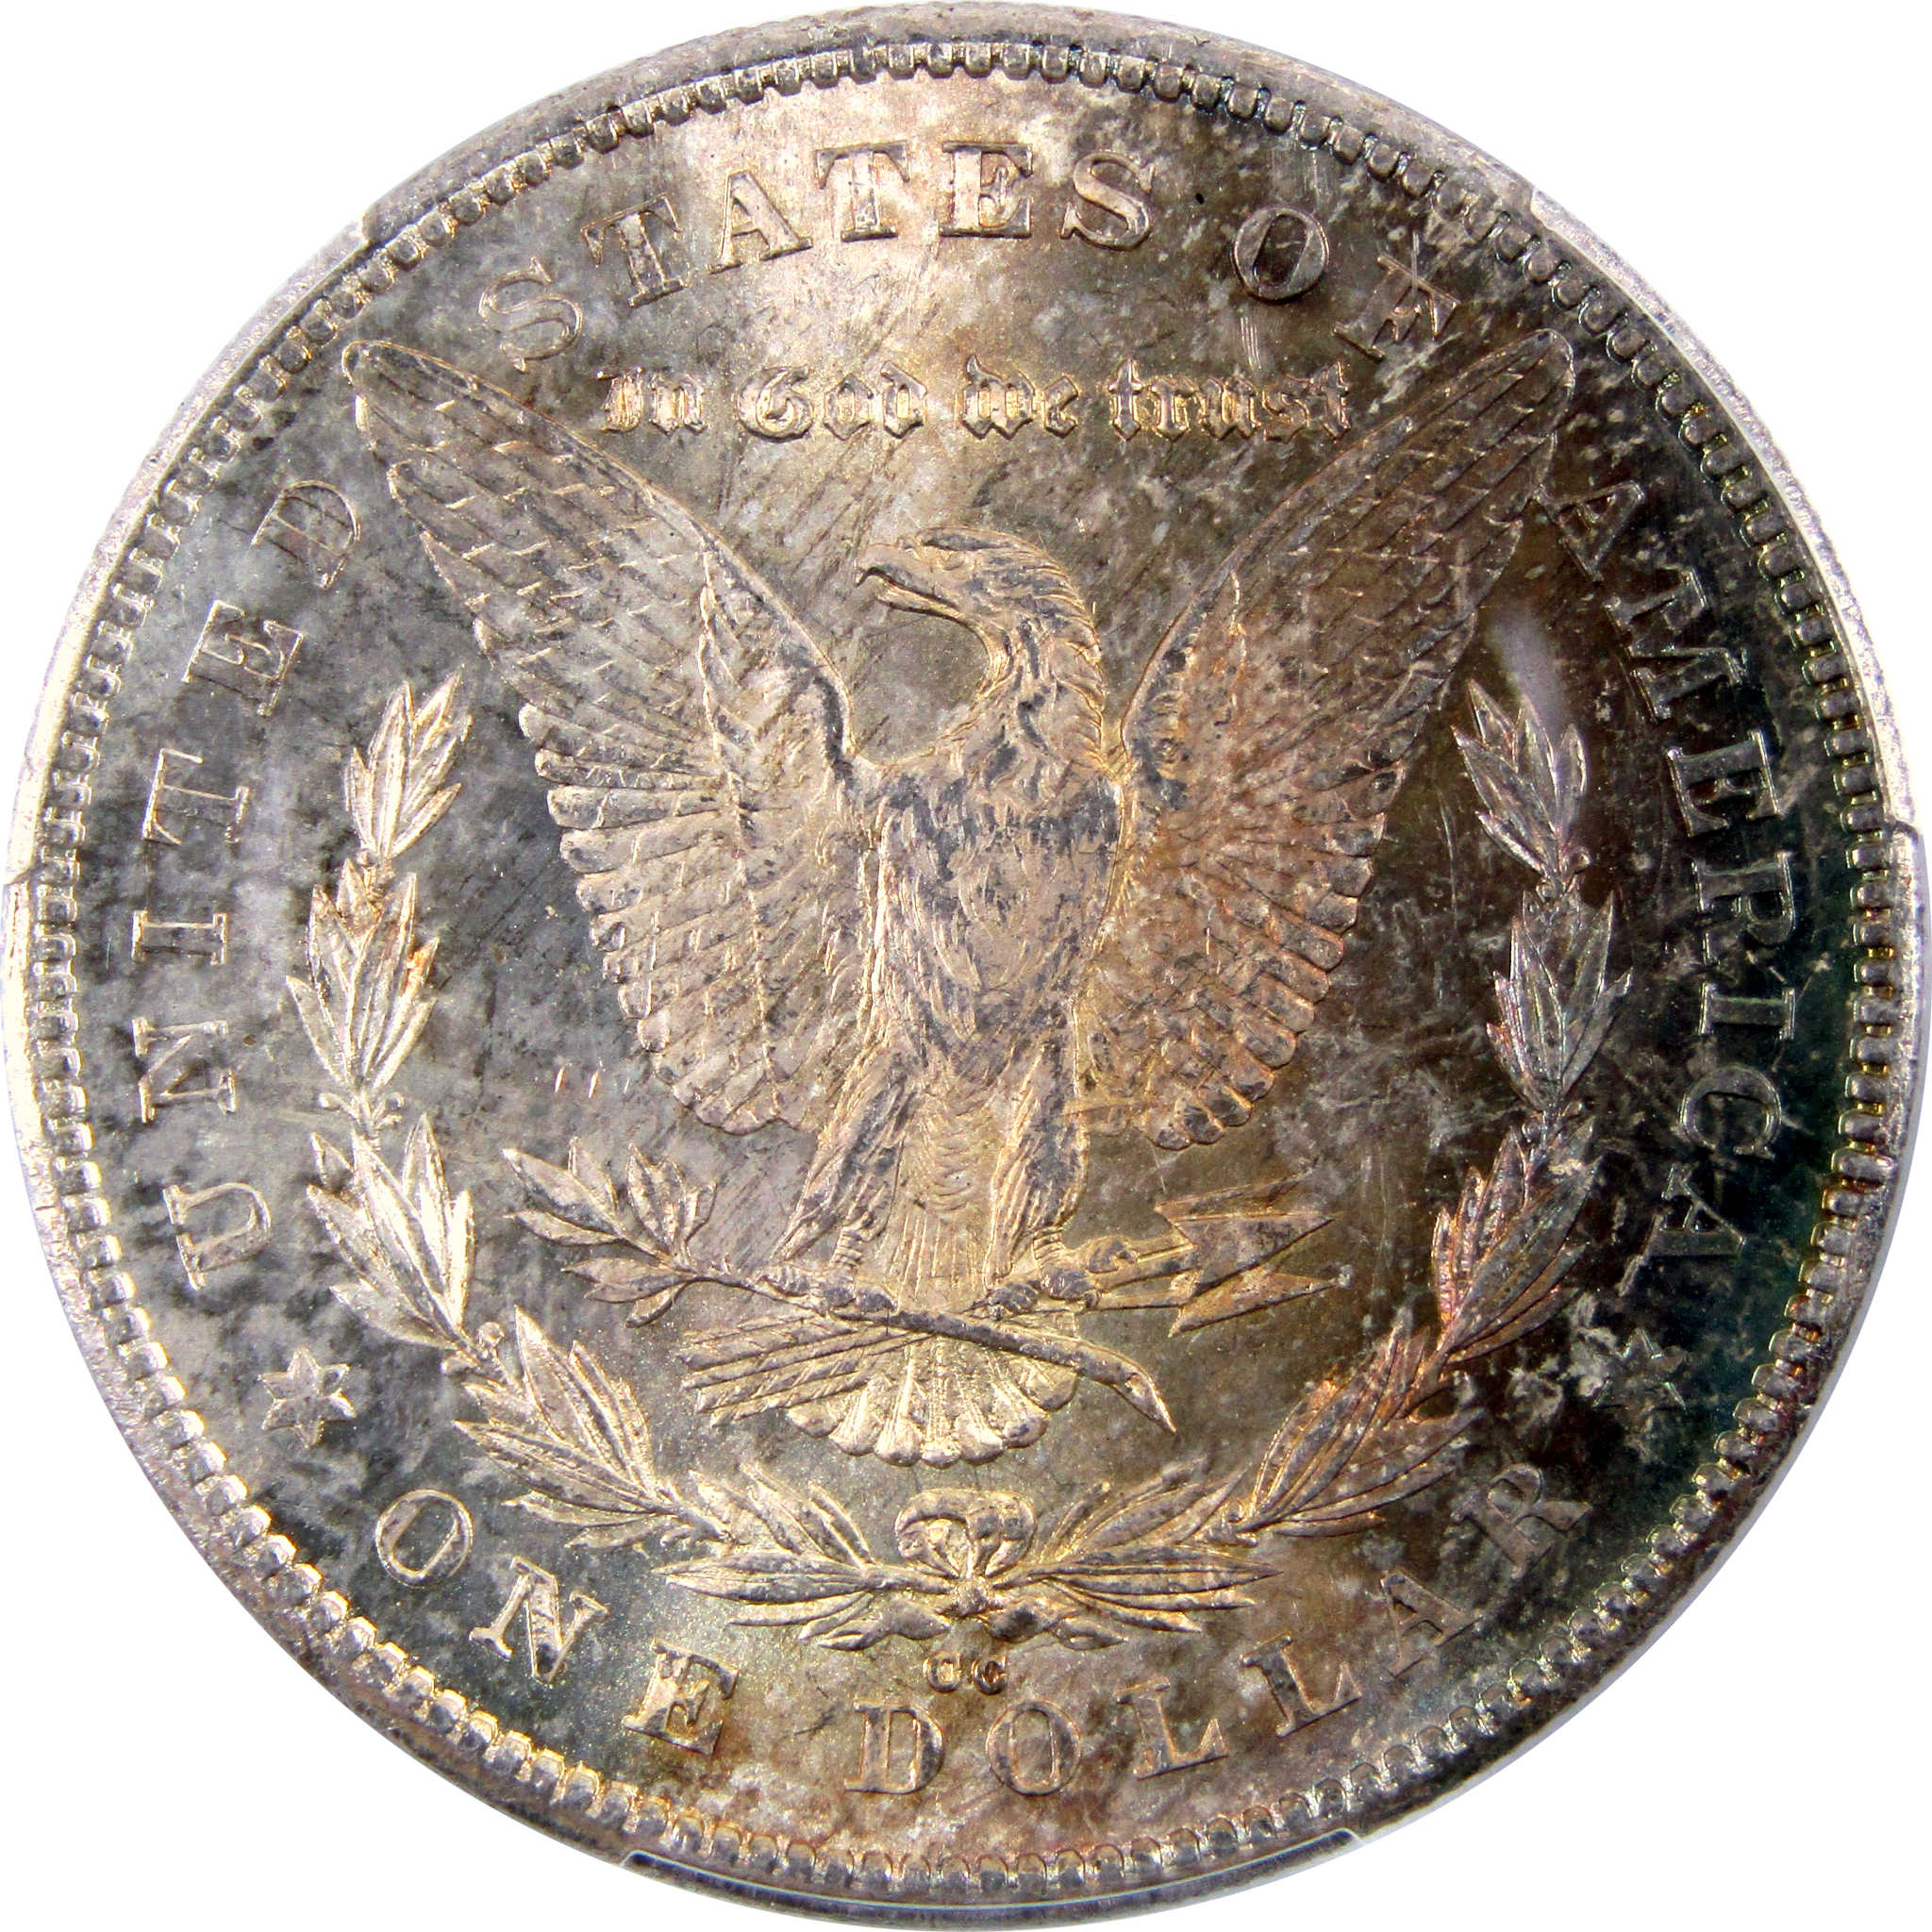 1878 CC Morgan Dollar MS 63 PCGS 90% Silver $1 Unc SKU:I9145 - Morgan coin - Morgan silver dollar - Morgan silver dollar for sale - Profile Coins &amp; Collectibles